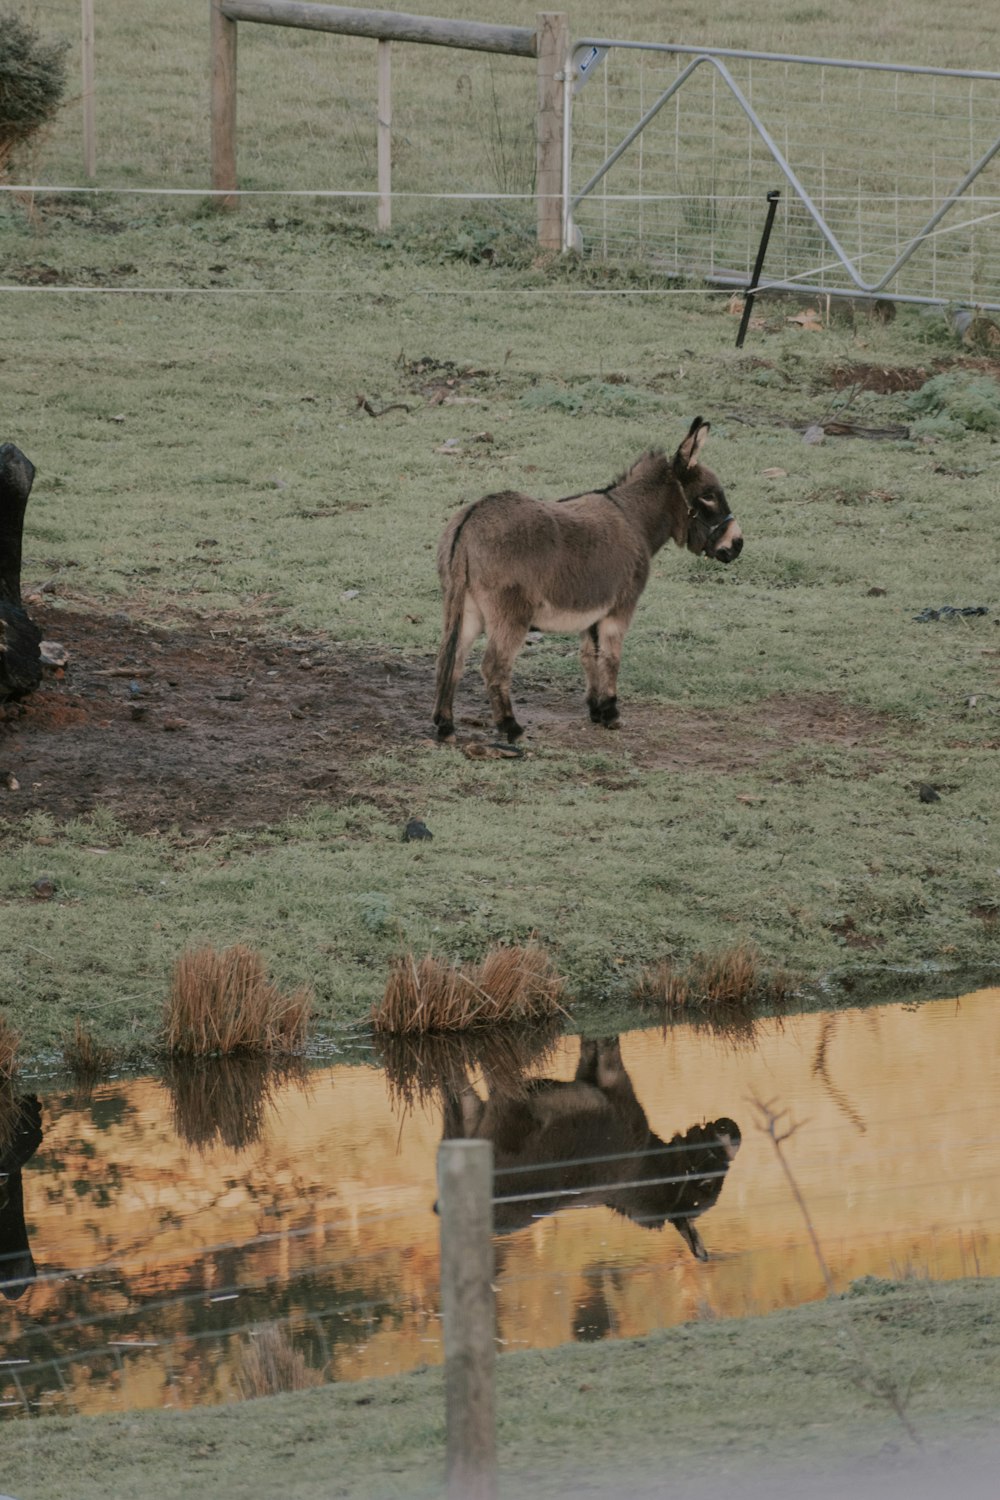 a donkey standing in a field next to a puddle of water